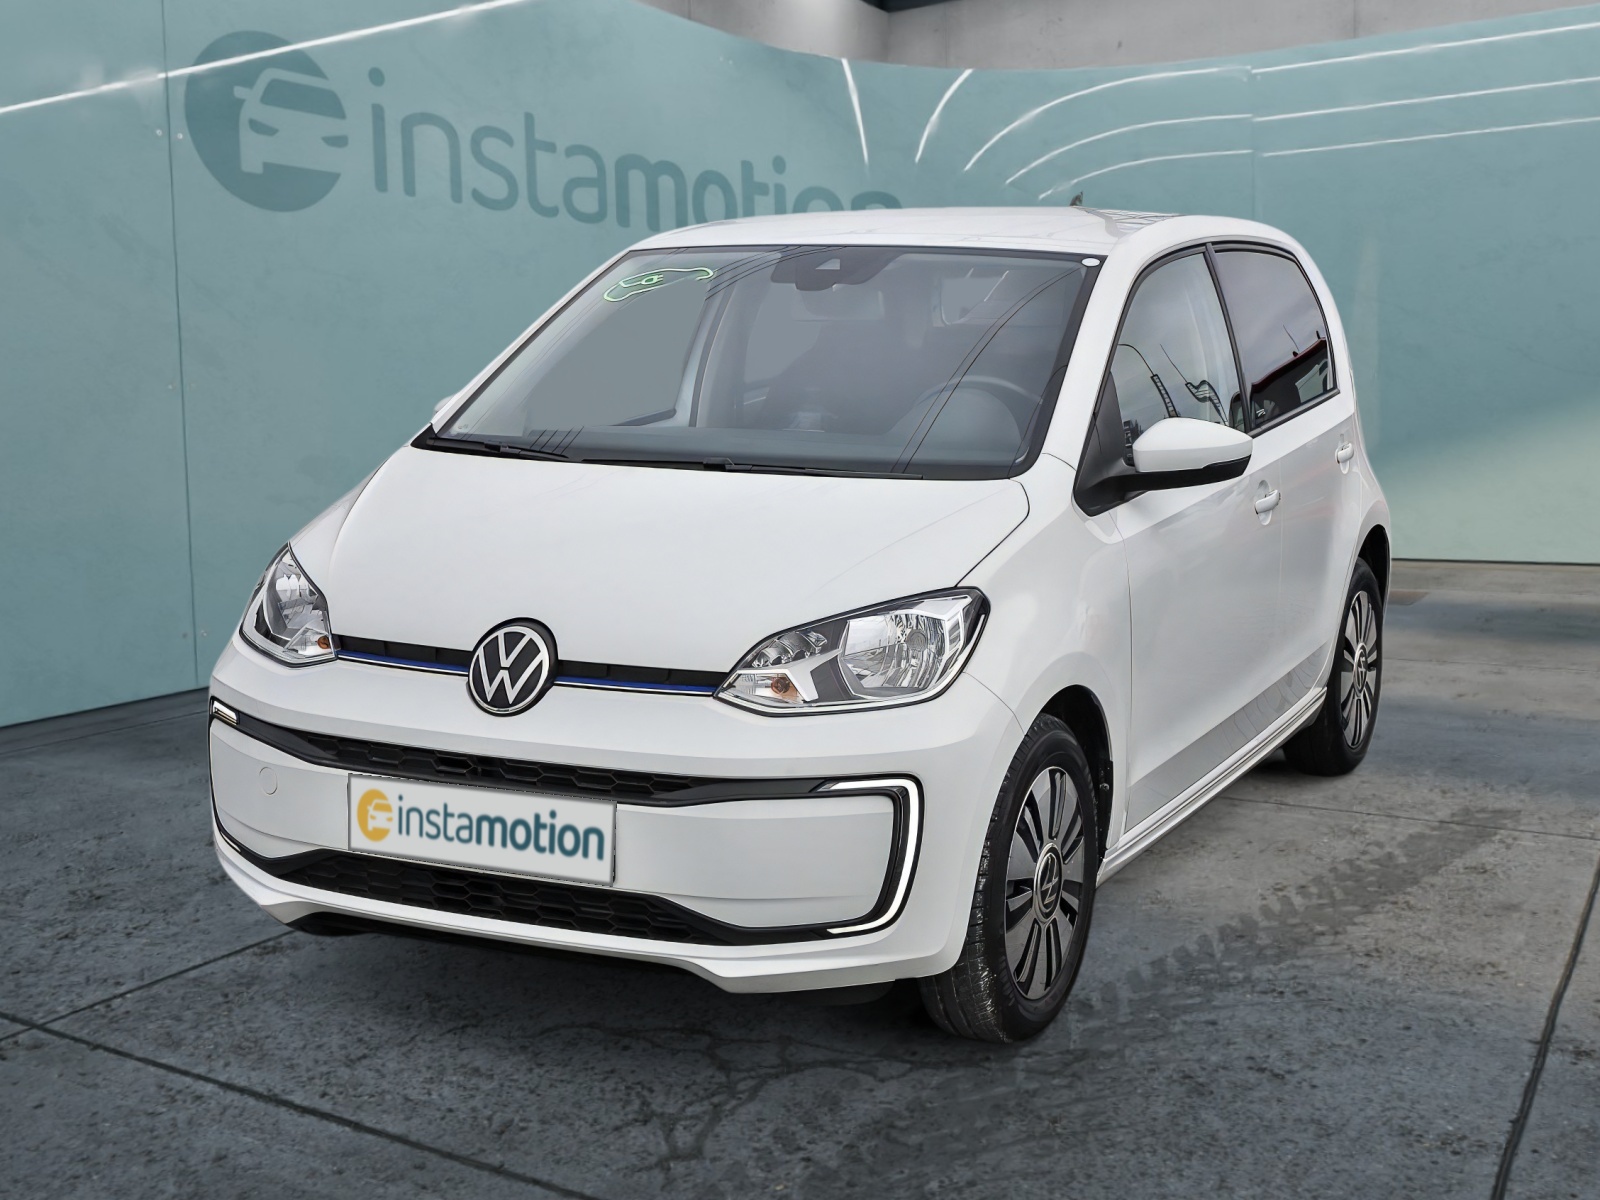 Volkswagen up e-up UNITED CCS MAPS AND MORE DOCK